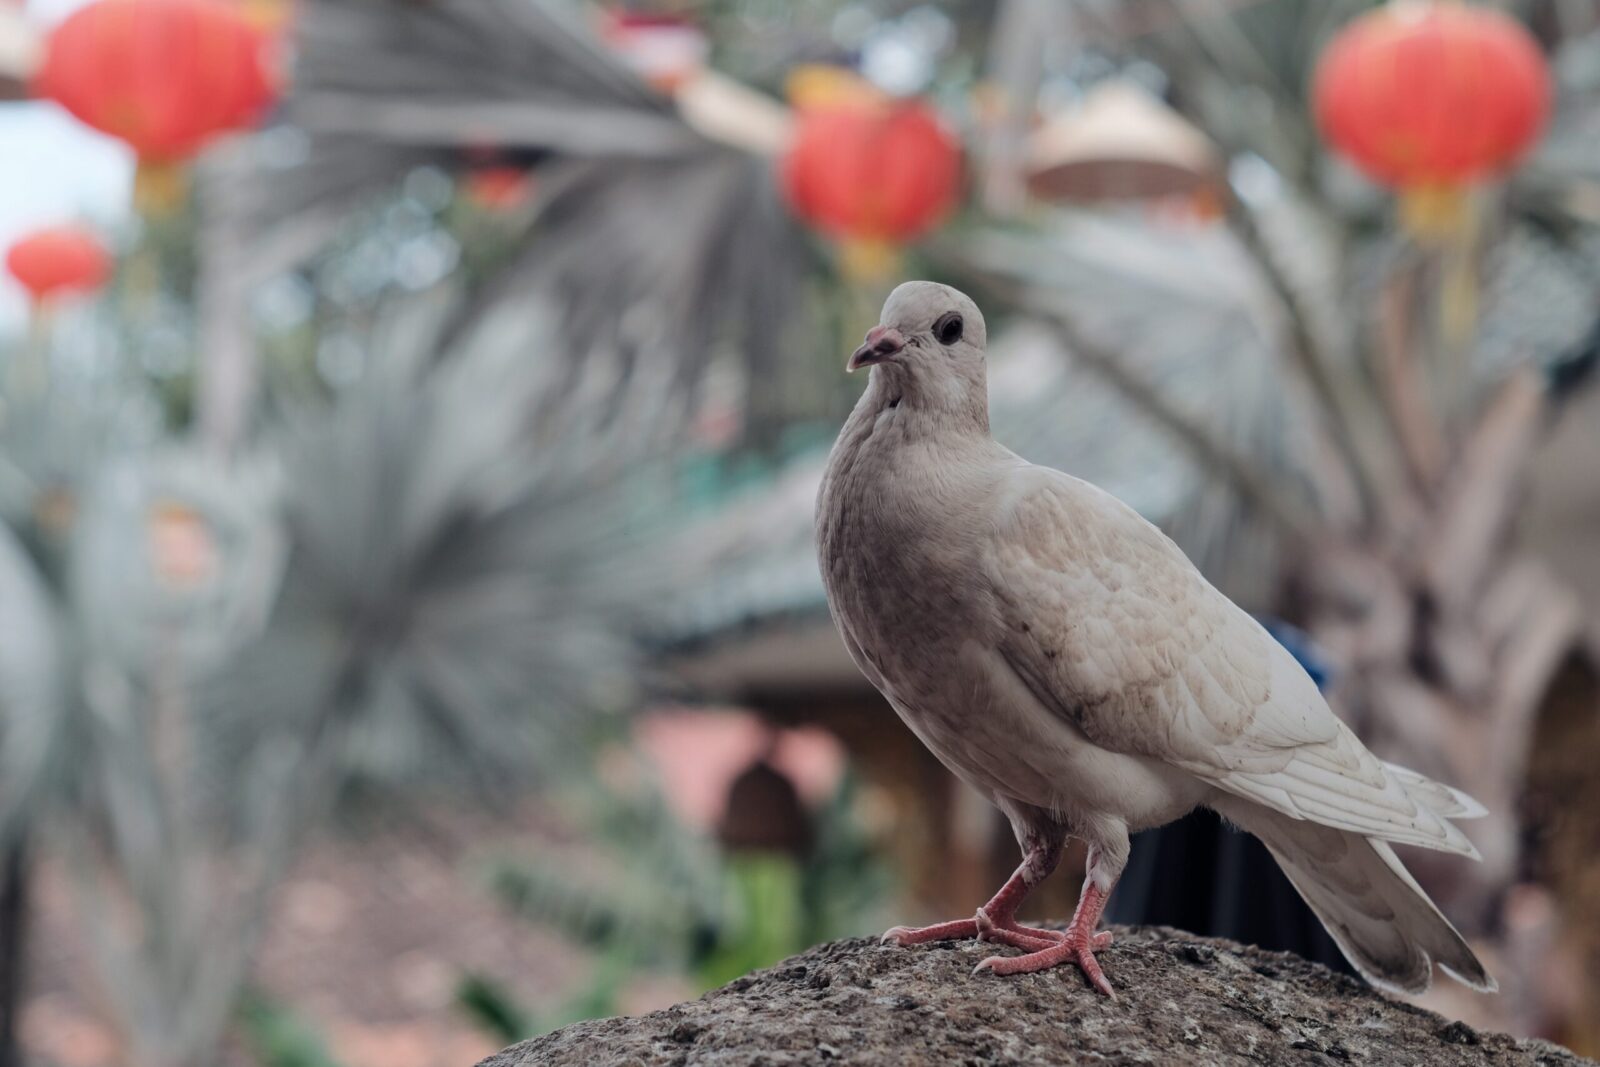 Here is An Interview With A Man Who Keeps Pigeons In His Home